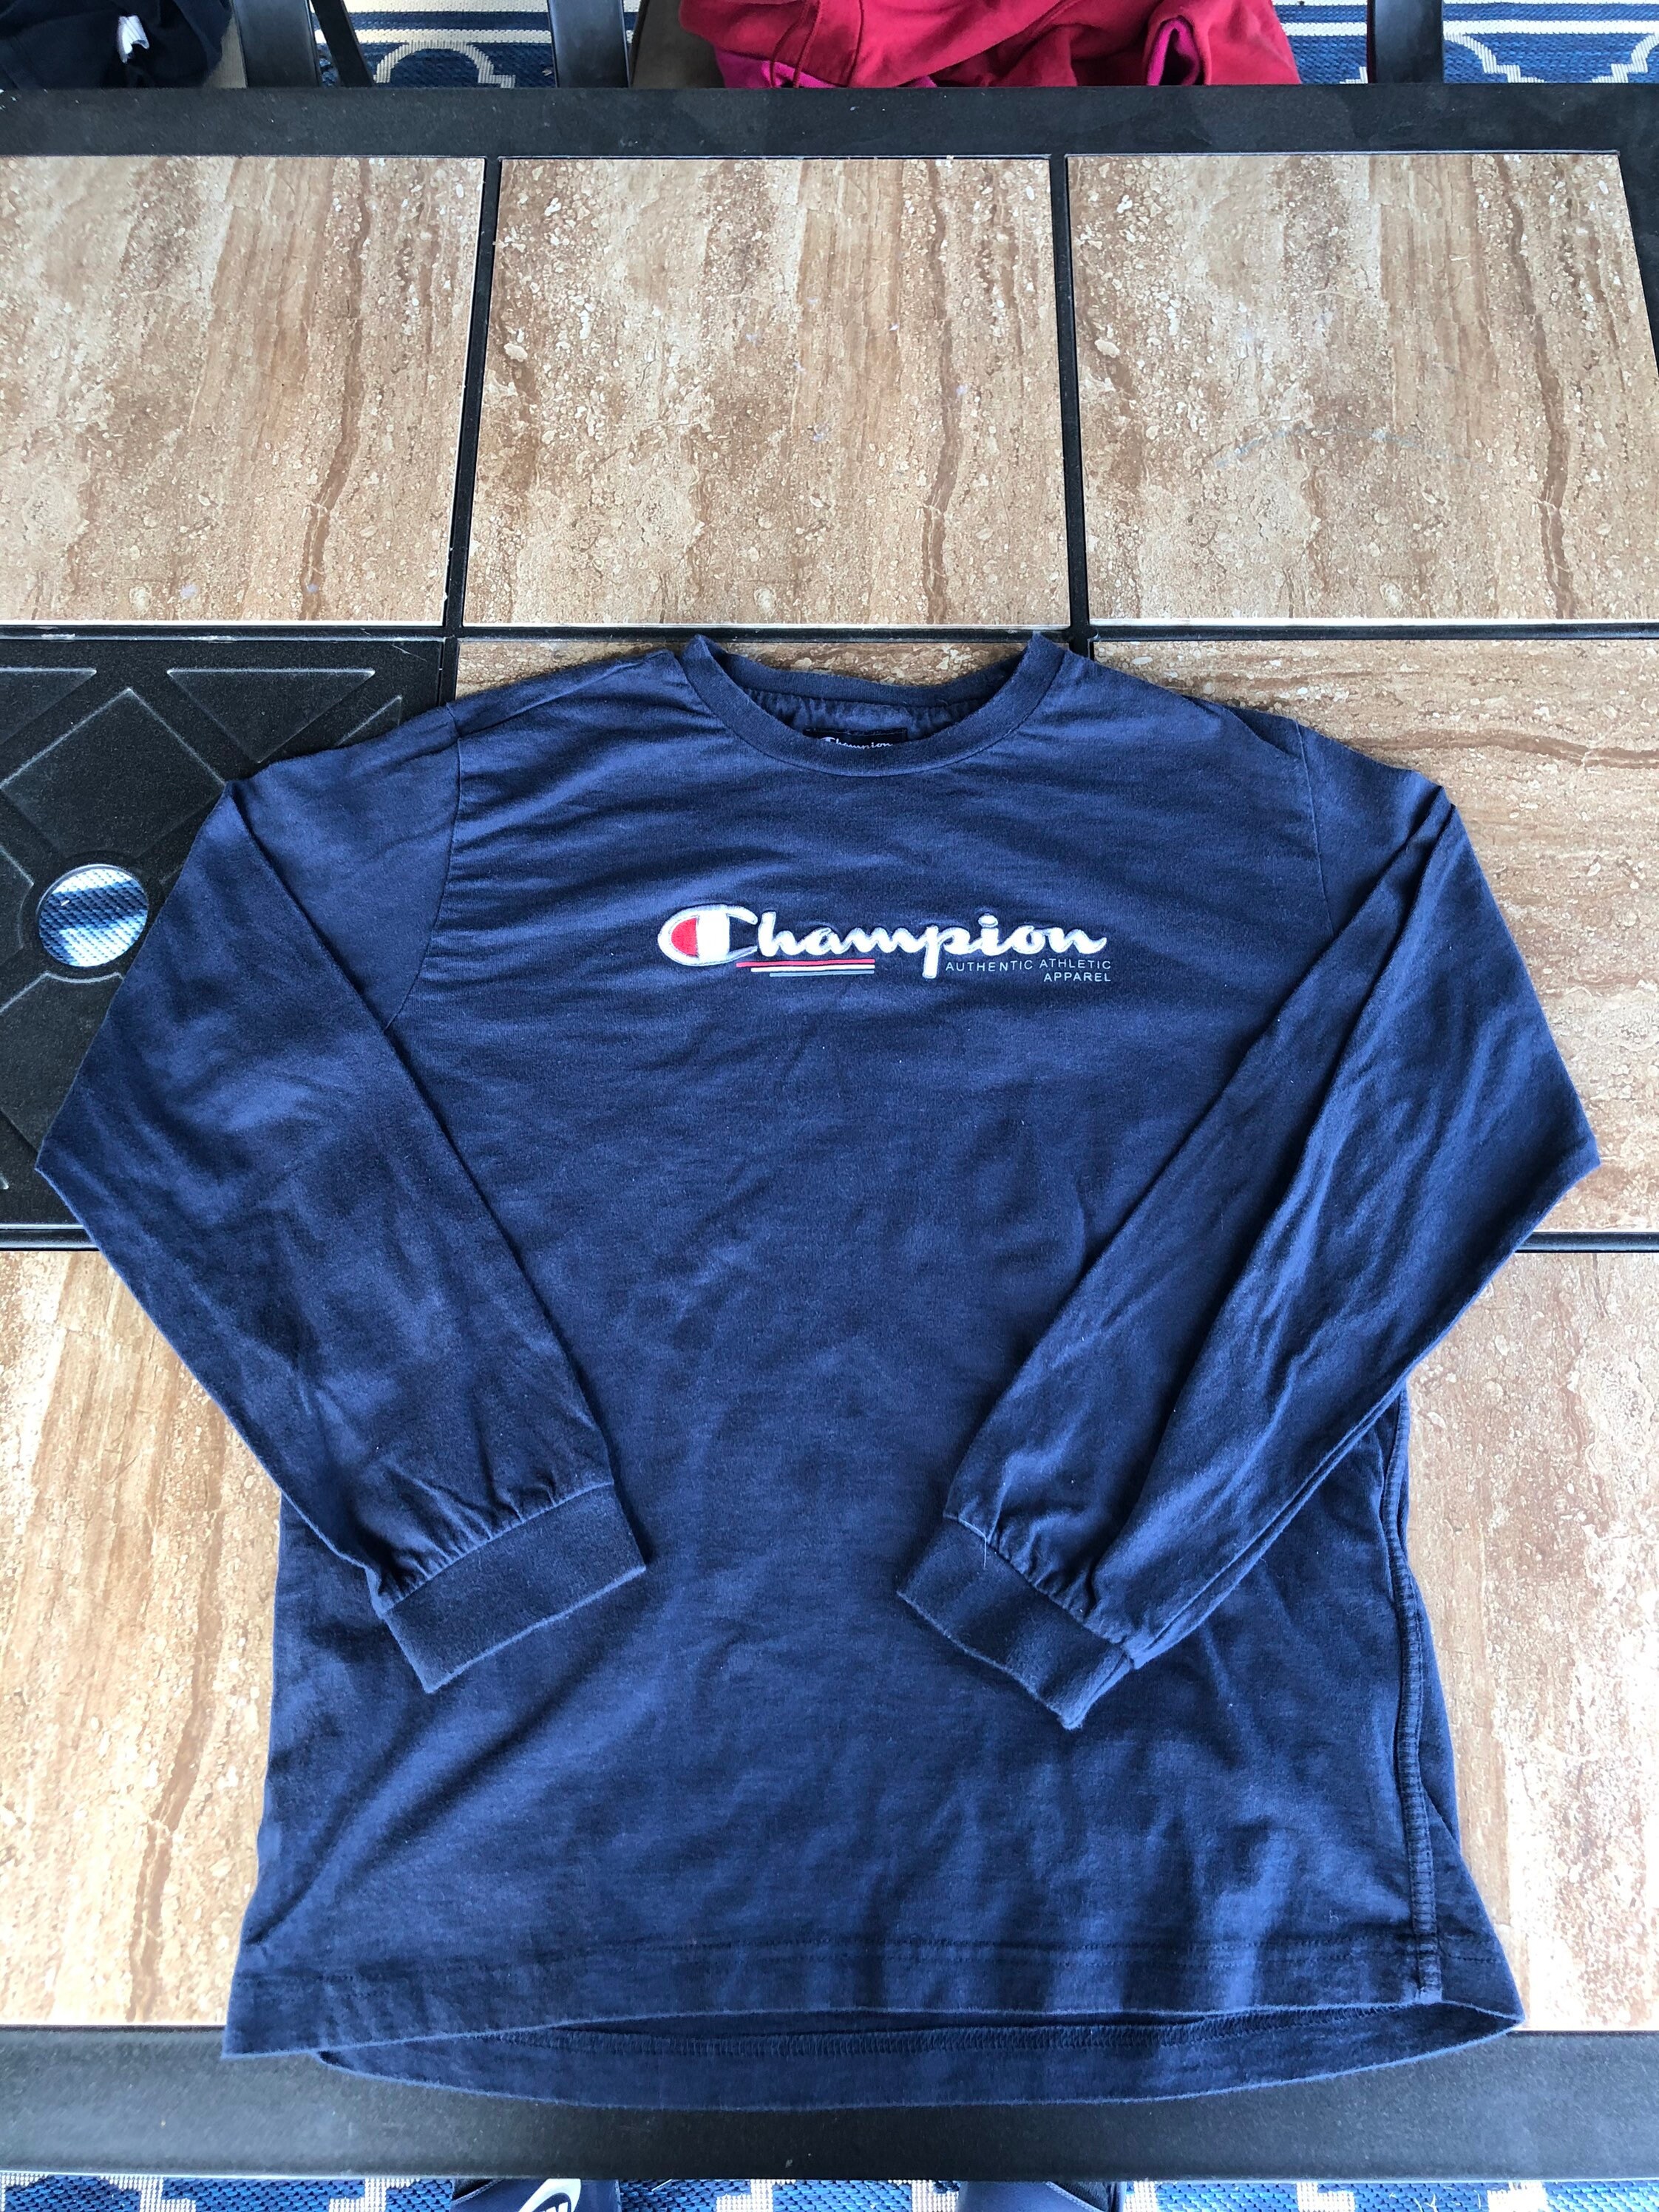 Buy > long sleeve blue champion shirt > in stock